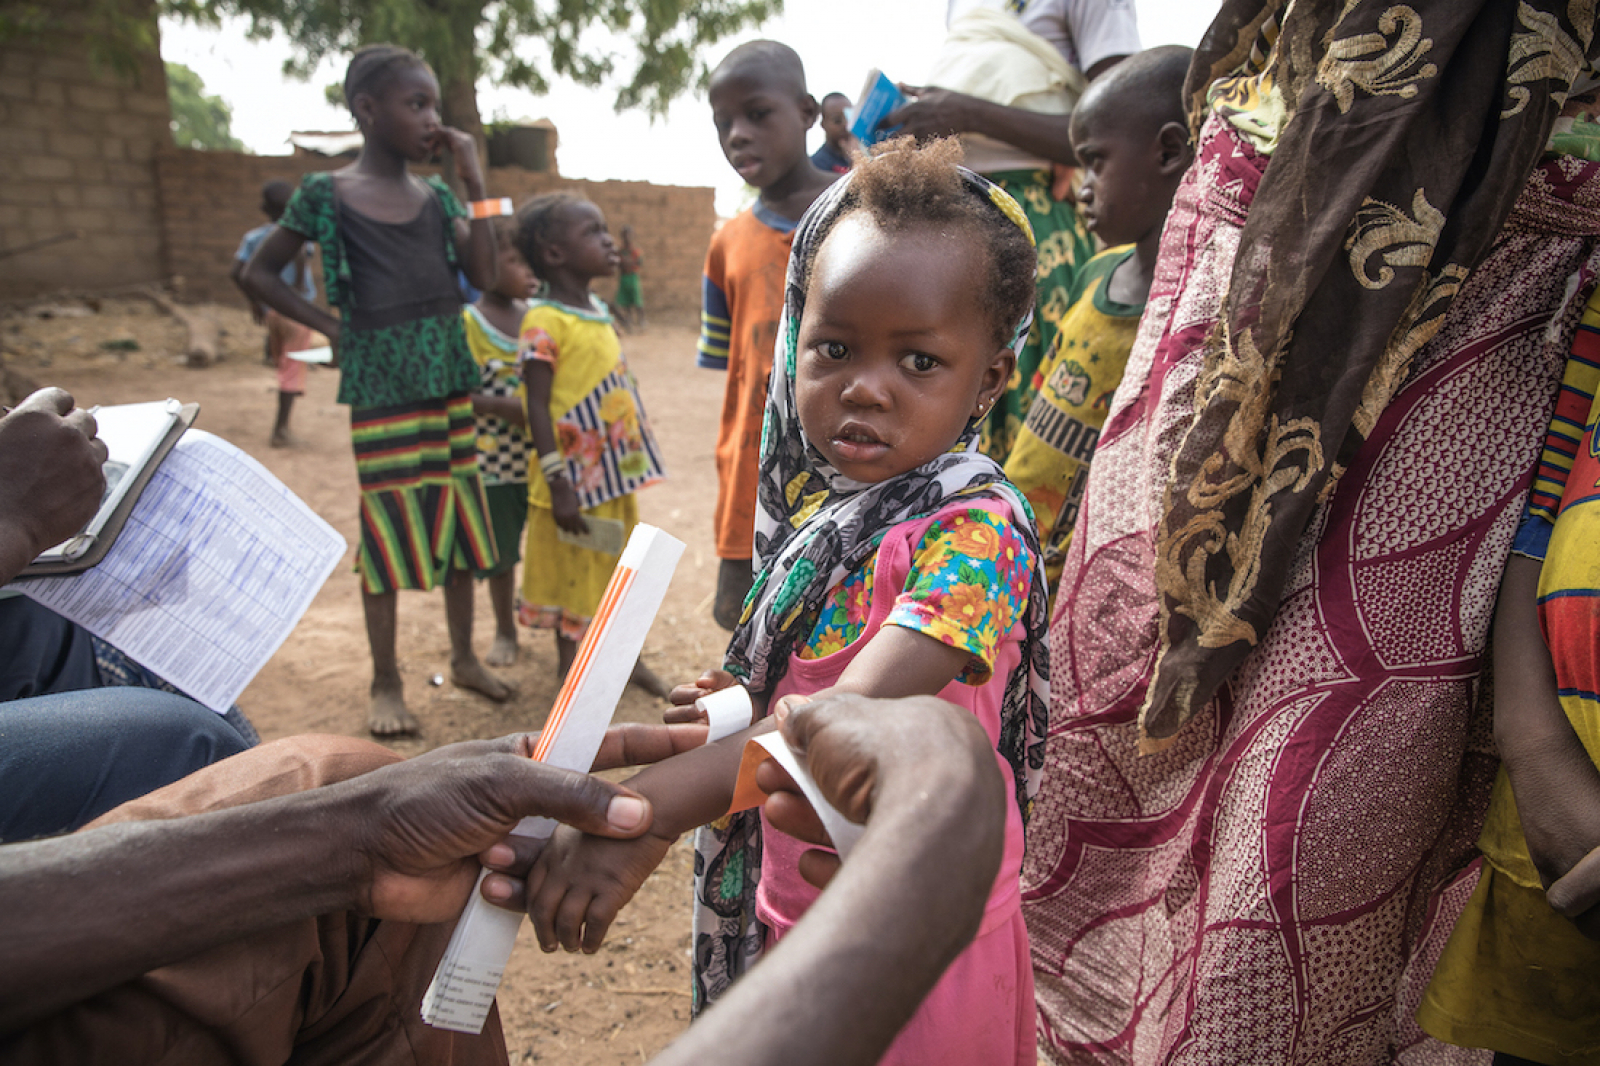 A child lines up to get her routine MACV vaccination in Burkina Faso in 2017. © Evelyn Hockstein/CDC Foundation